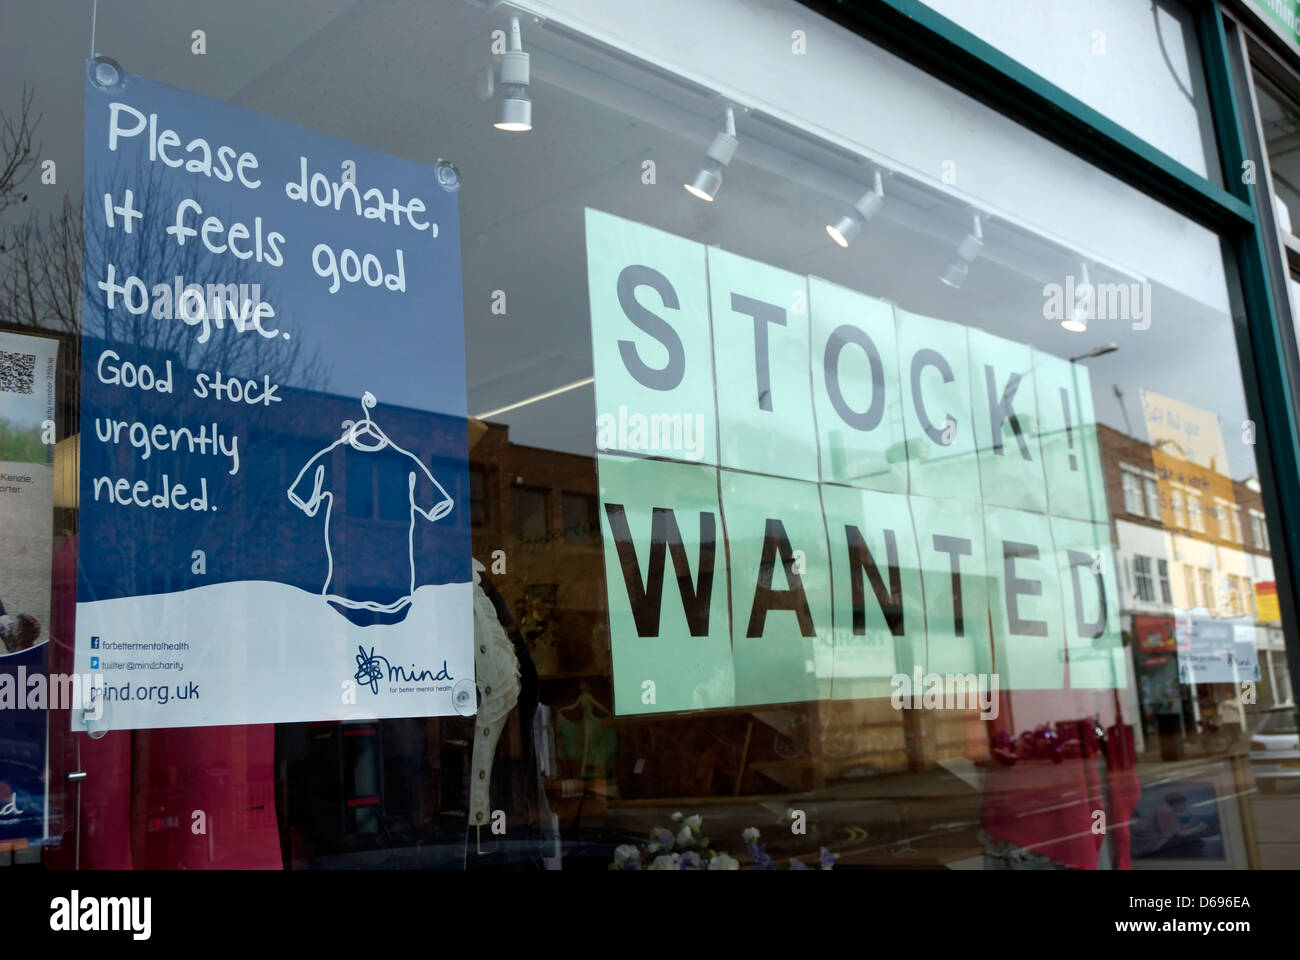 please donate and stock wanted posters in a mind charity shop, east twickenham, middlesex, england Stock Photo